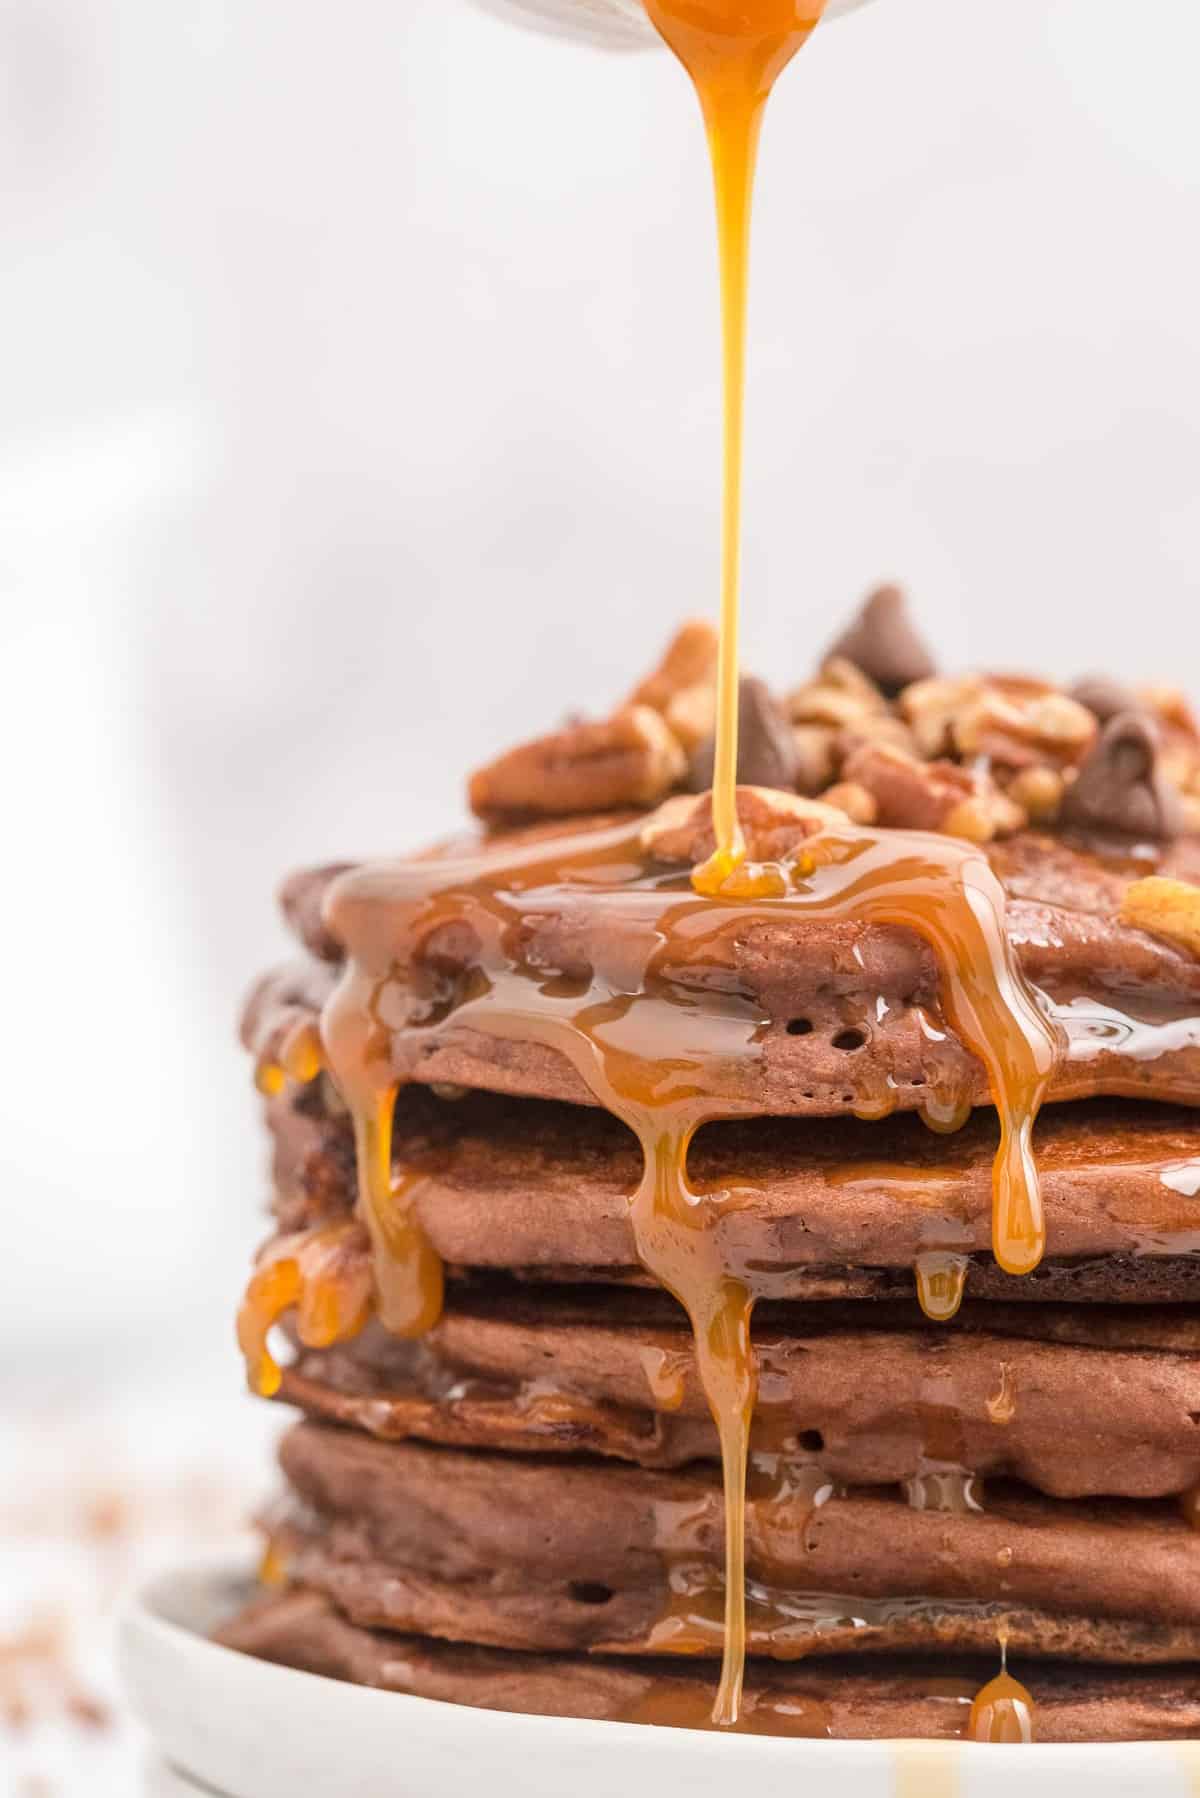 Caramel being poured on a stack of chocolate and caramel pancakes.